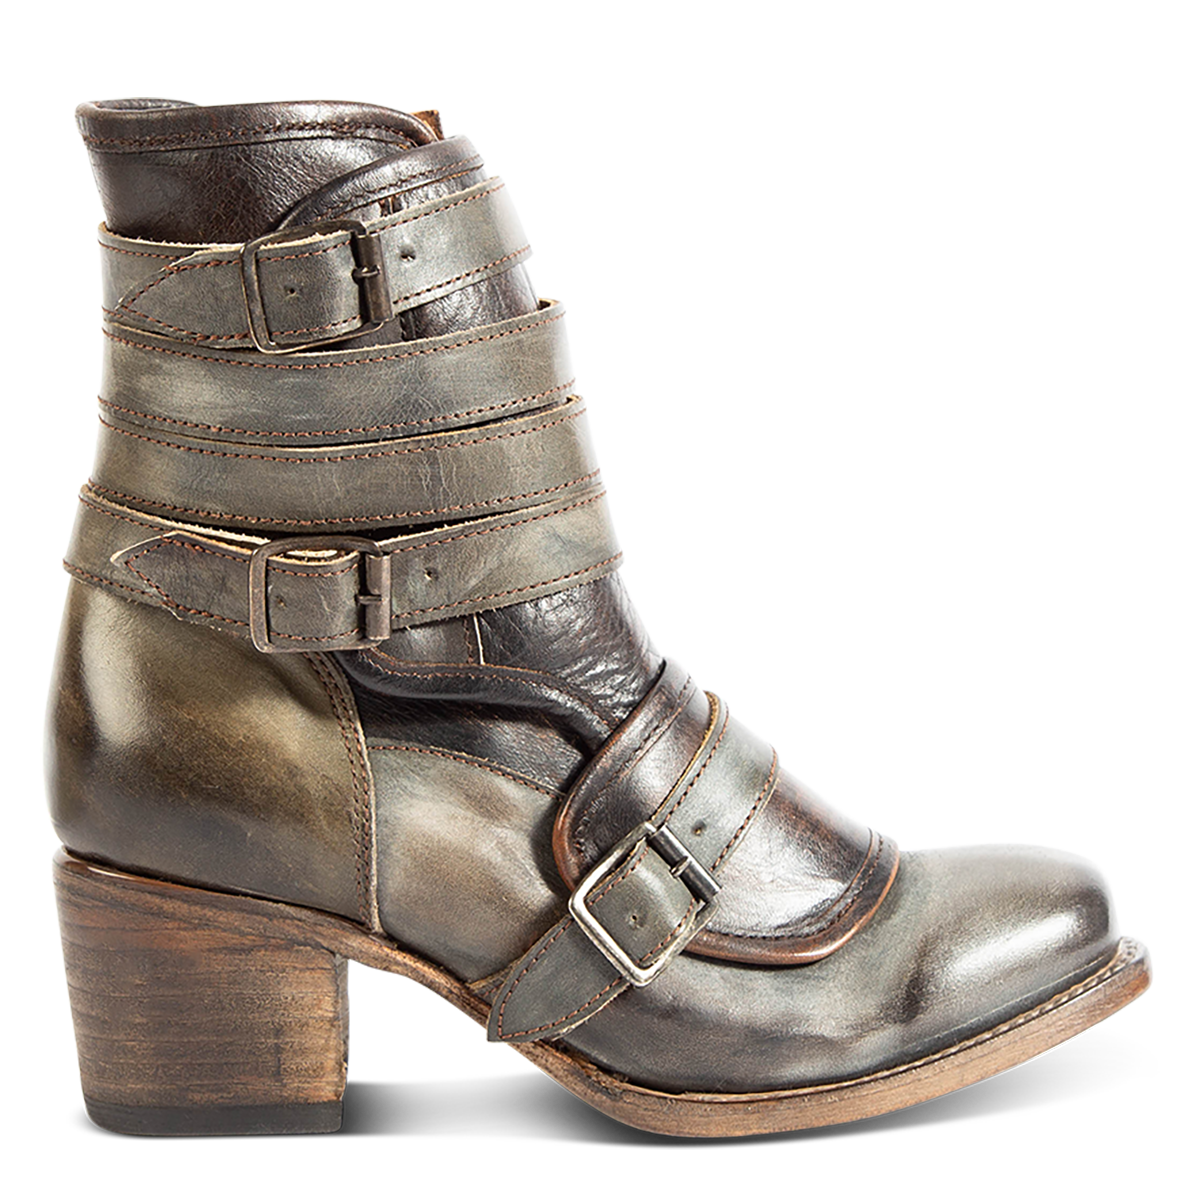 FREEBIRD women's Darlin olive leather bootie with leather straps, inside zip closure and square toe